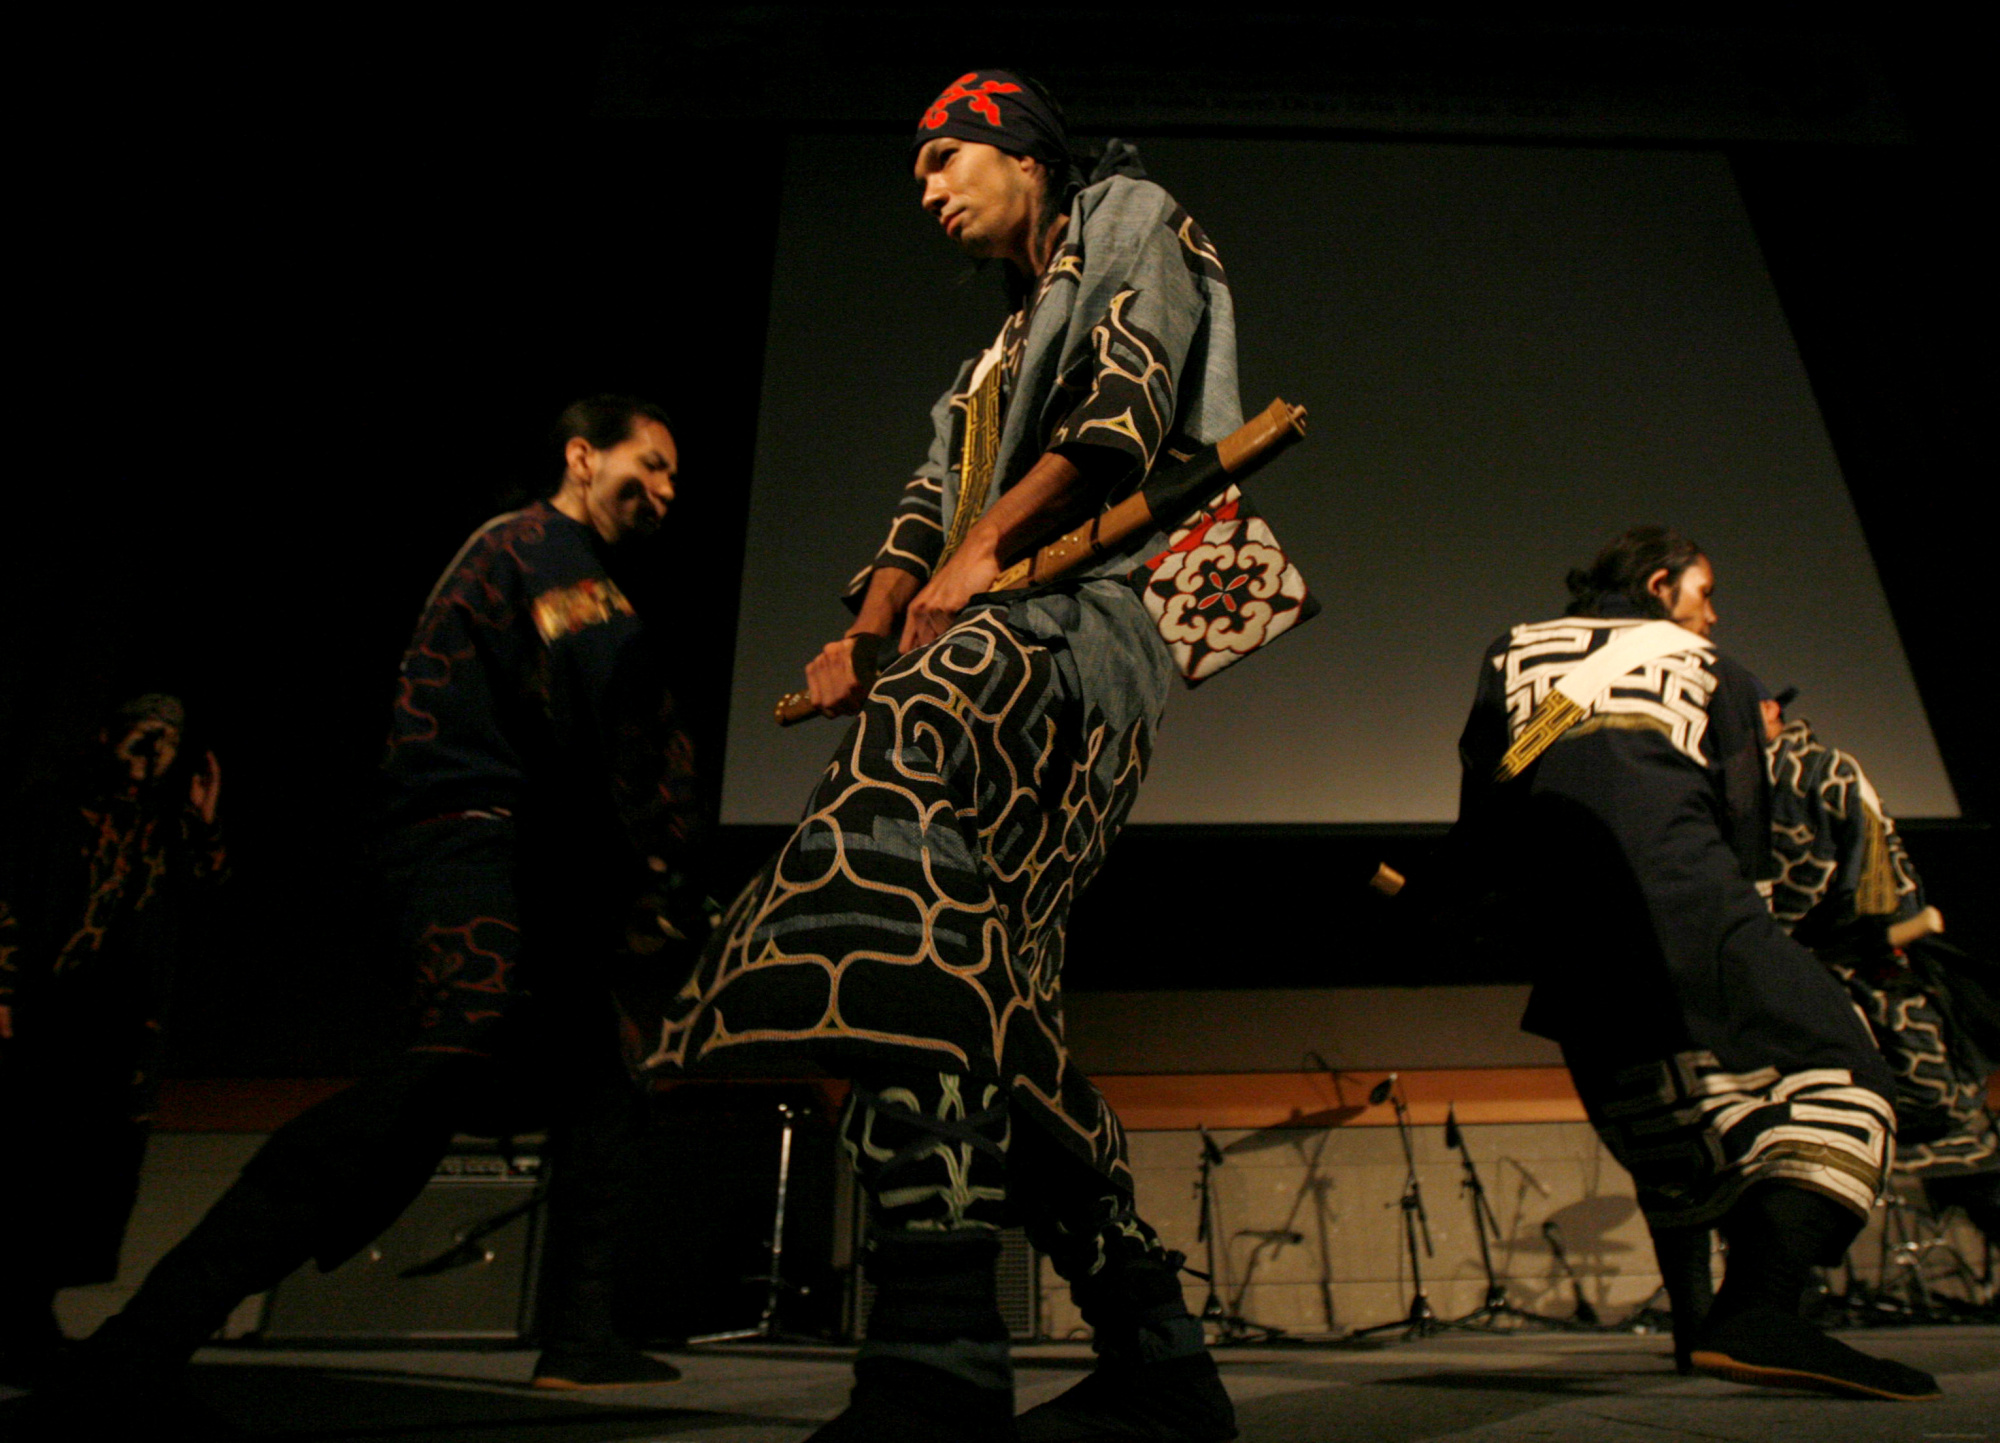 The Ainu Rebels, a performance group mixing traditional Ainu dance and music, dance during the Indigenous Peoples Summit in Sapporo on July 4, 2008, ahead of the G8 Hokkaido Toyako Summit. The Ainu people, a hunting and gathering people thought to be descendants of early inhabitants of Japan who were later displaced mainly to Hokkaido, organized their summit with other indigenous people around the world. | REUTERS